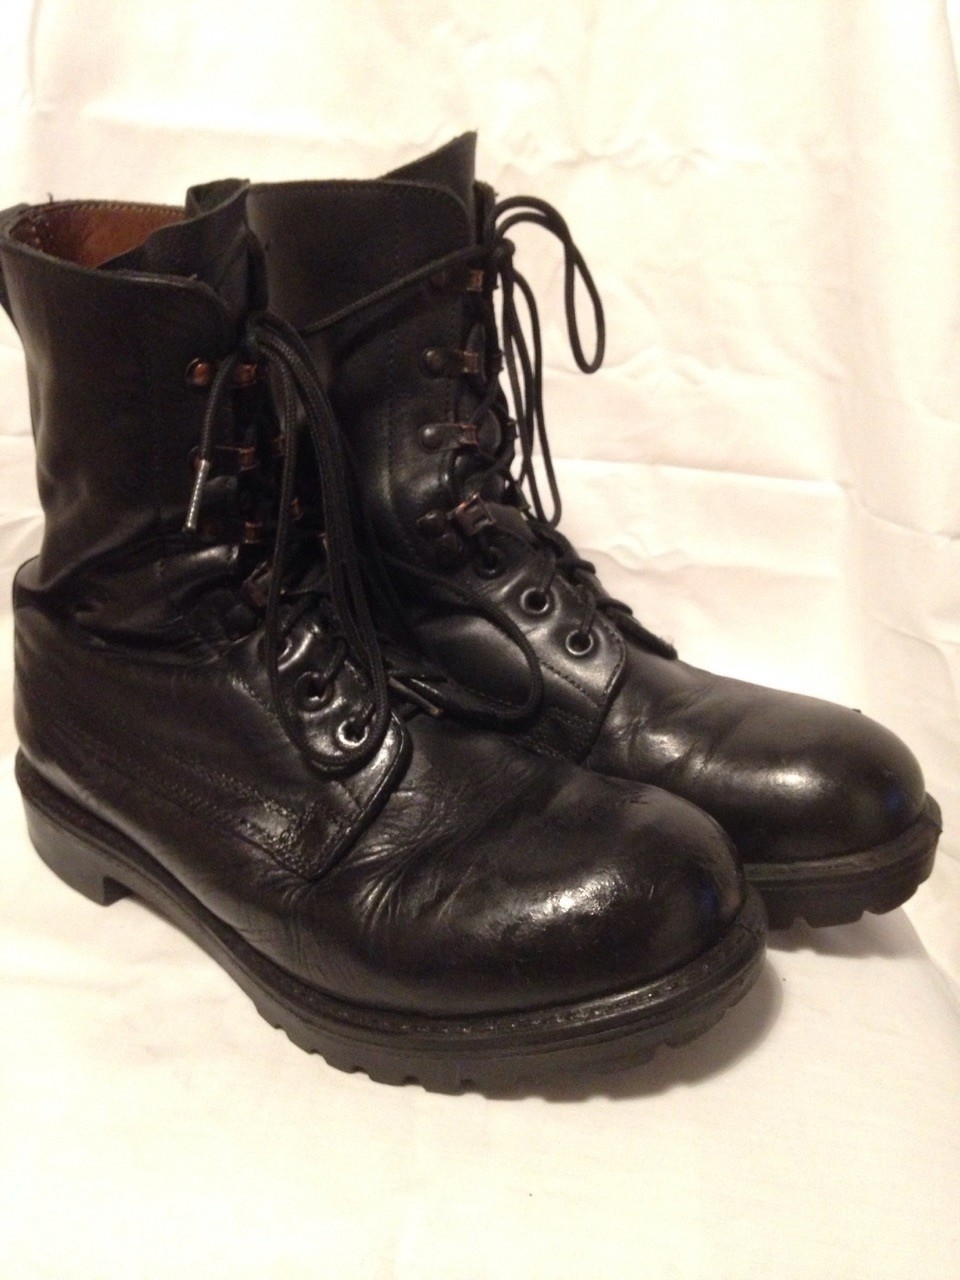 British Army Assault Boots Size 8M